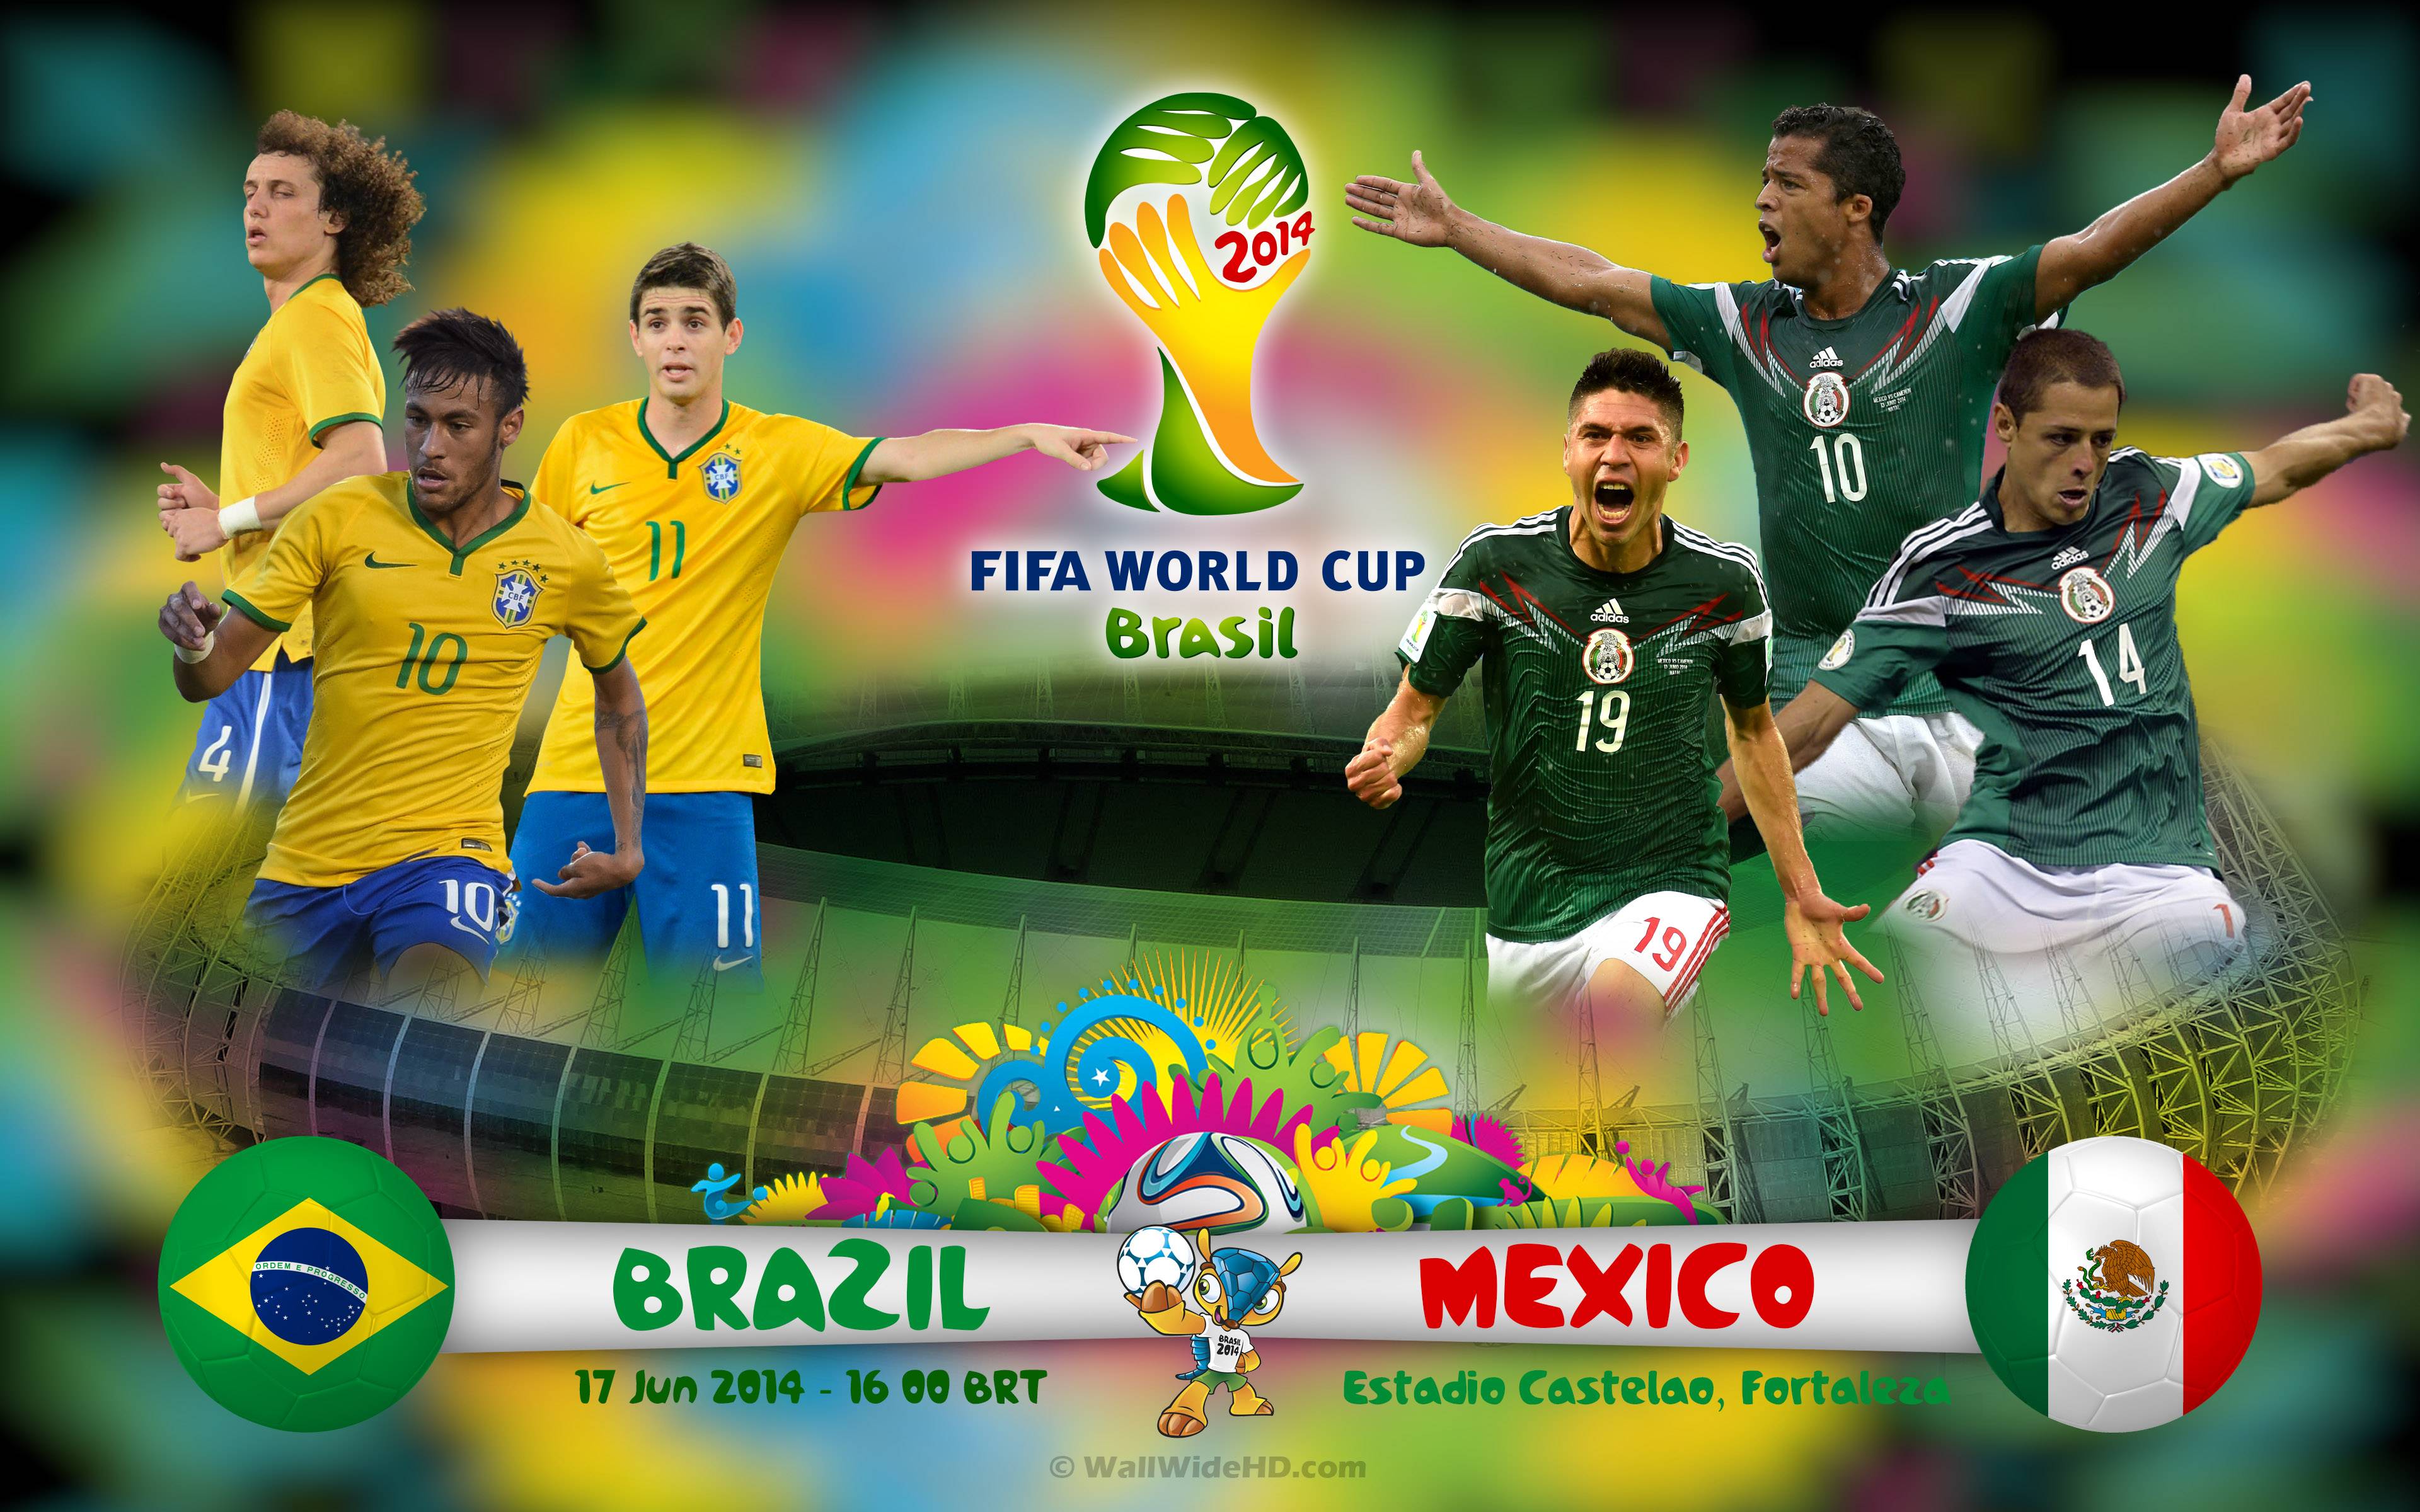 Brazil vs Mexico 2014 World Cup Group A Football Match Wallpapers